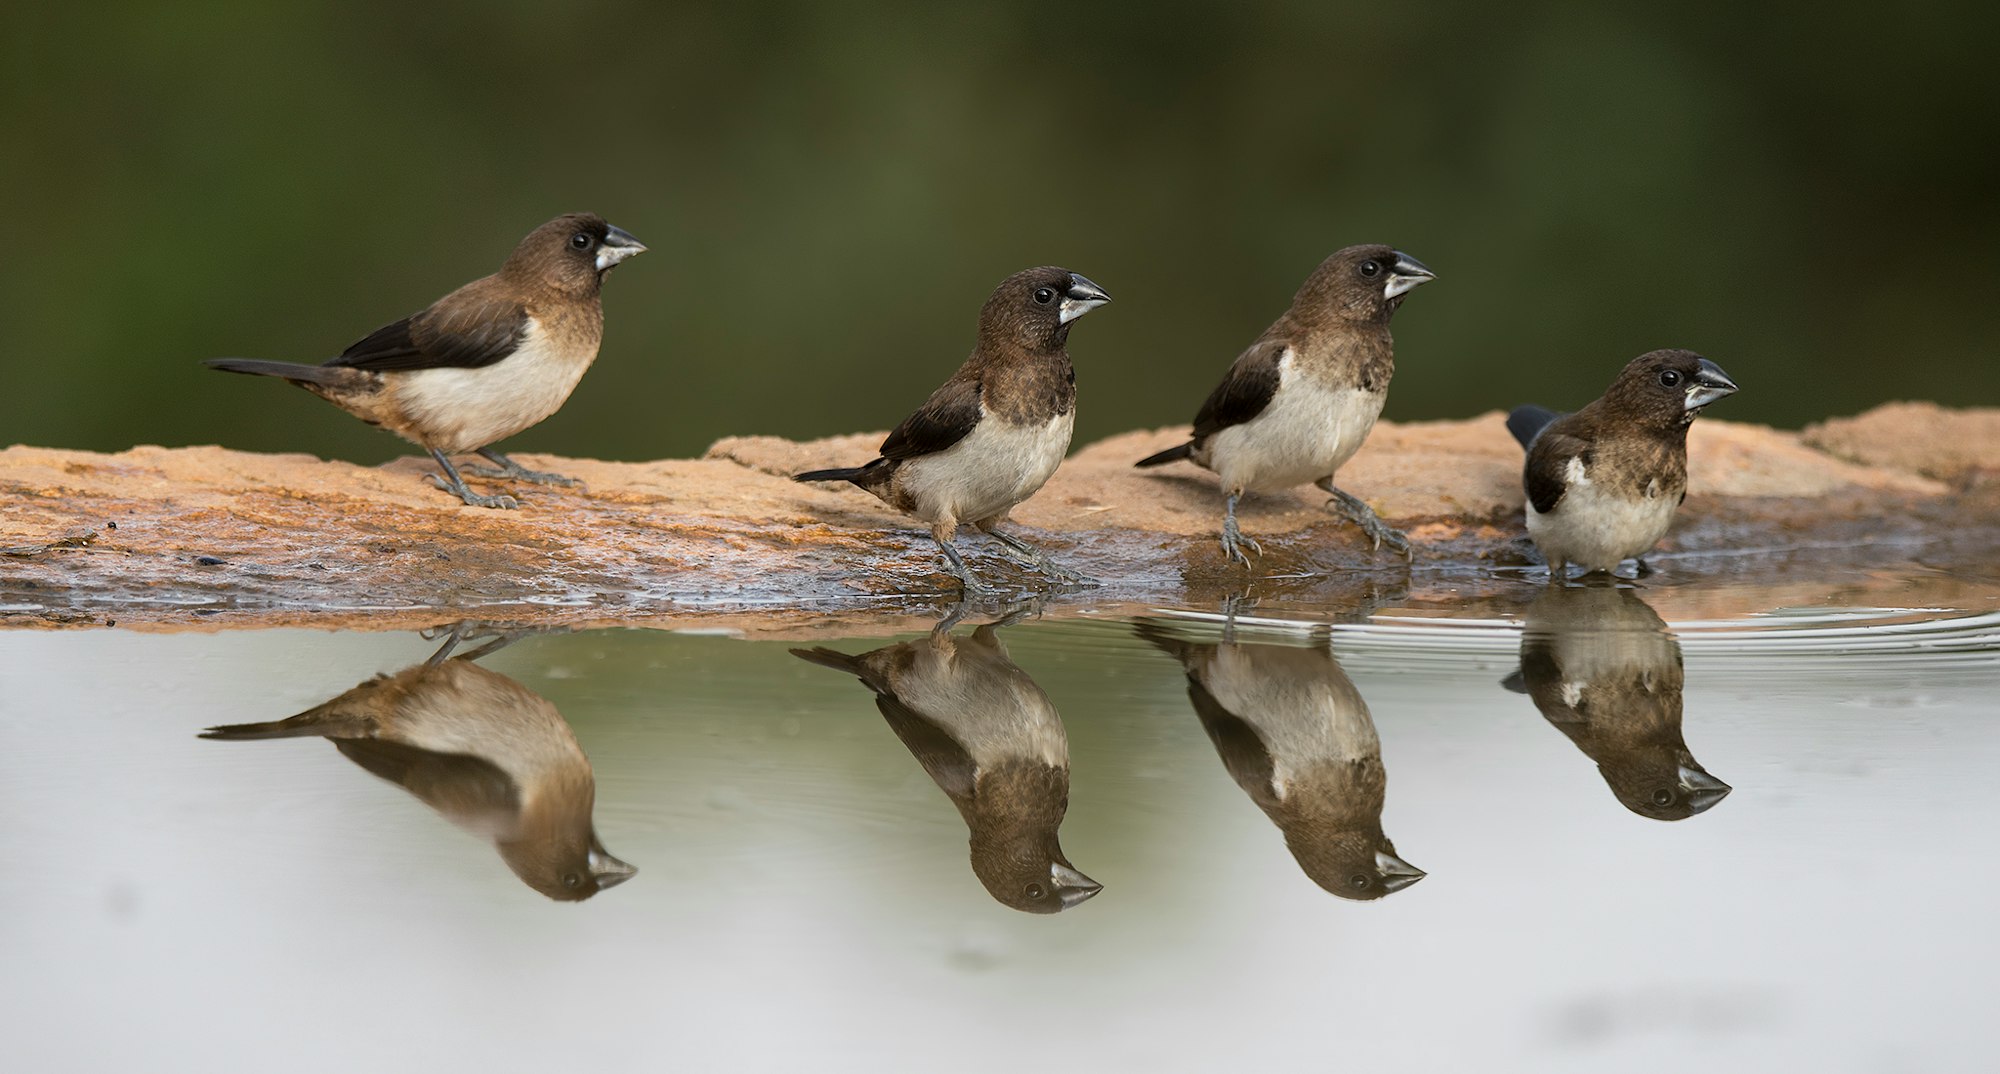 Four magpies displaying self-recognition by their reflections on mirror